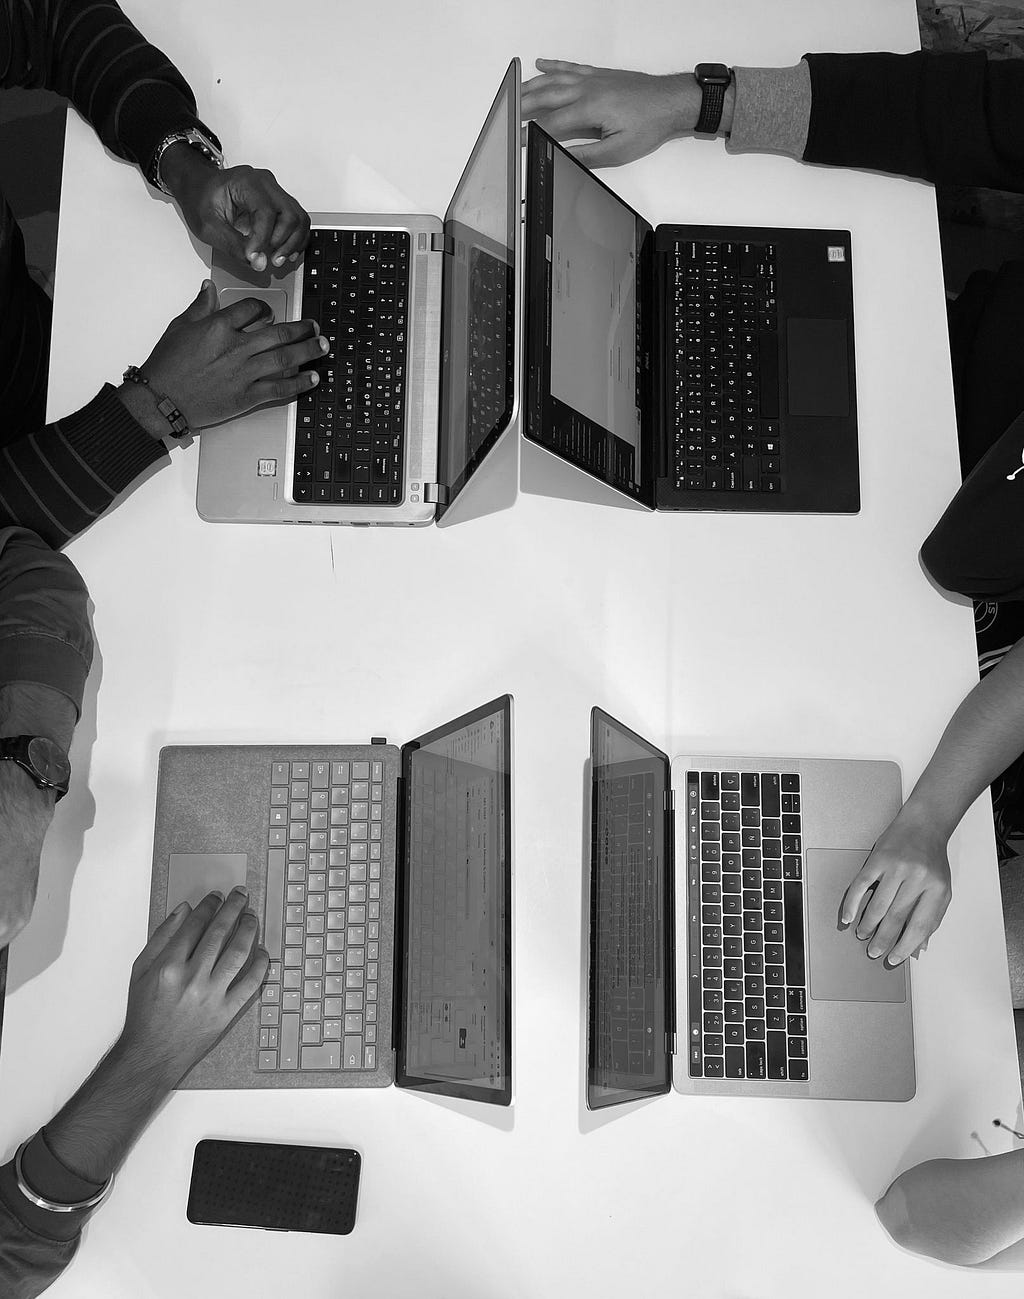 A picture showing a group of collabrators using laptops